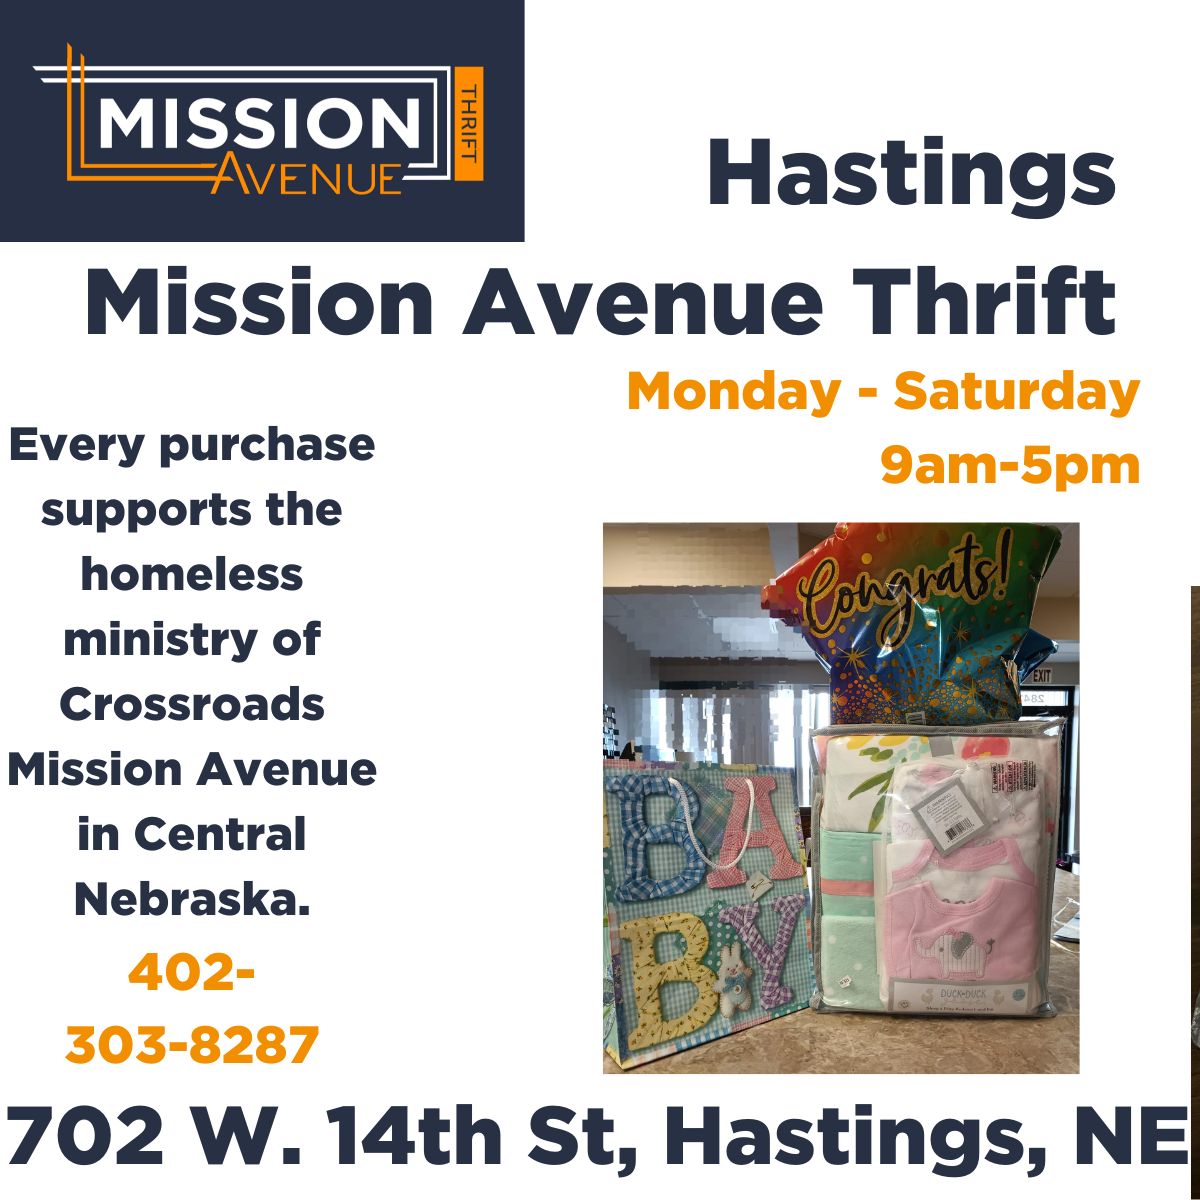 Come in TODAY and see what's NEW at Hastings Mission Avenue Thrift! crossroadsmission.com/thrift-stores/ #MissionAvenueThrift #HastingsNebraska #Thriftstore #Shoptoday